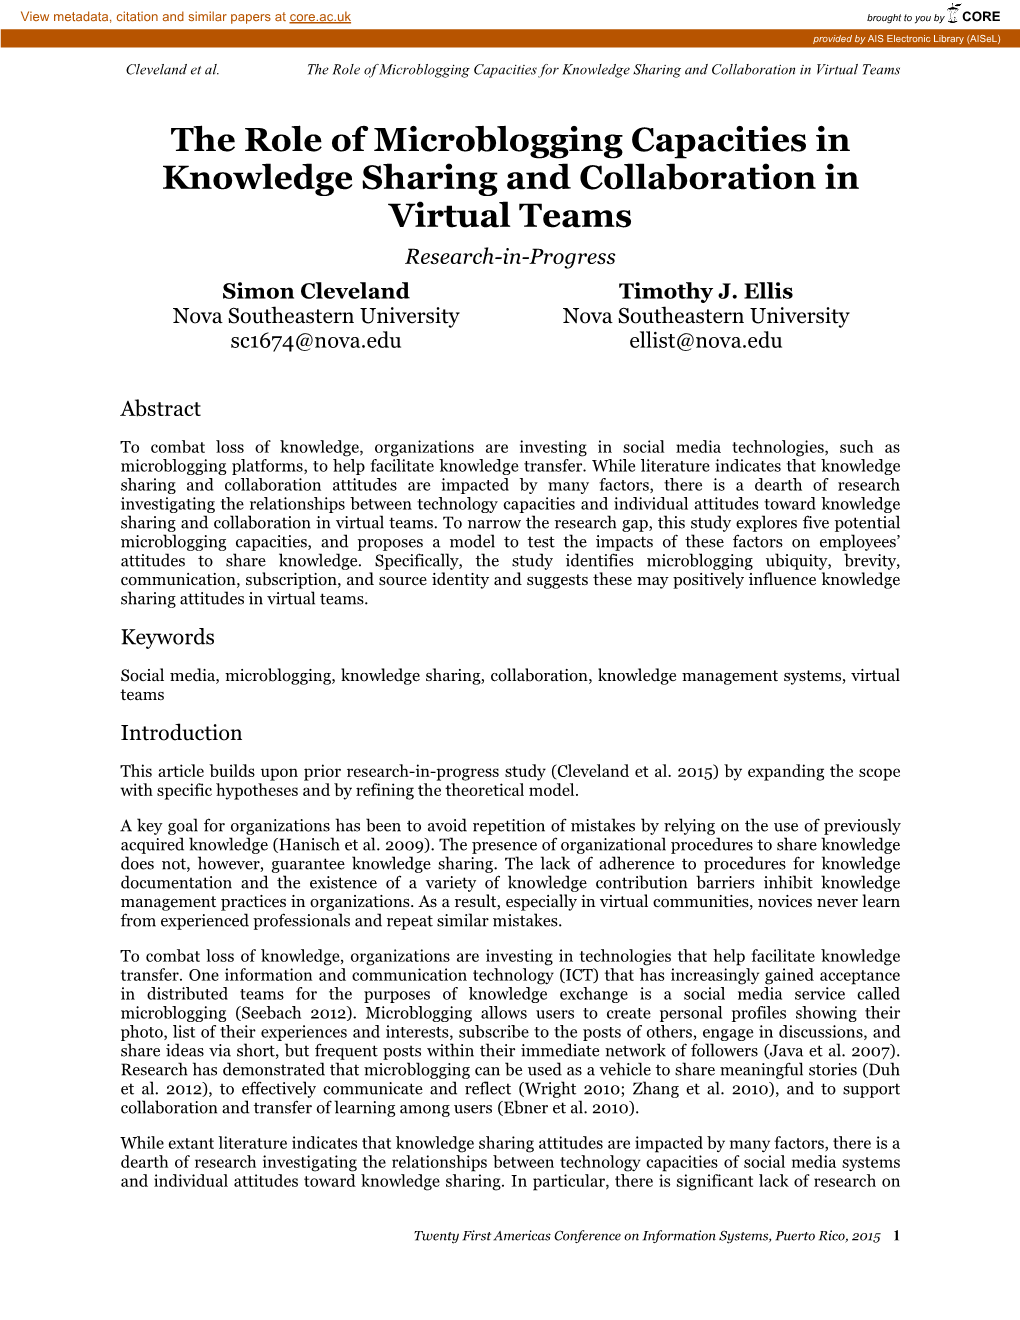 The Role of Microblogging Capacities in Knowledge Sharing and Collaboration in Virtual Teams Research -In -Progress Simon Cleveland Timothy J